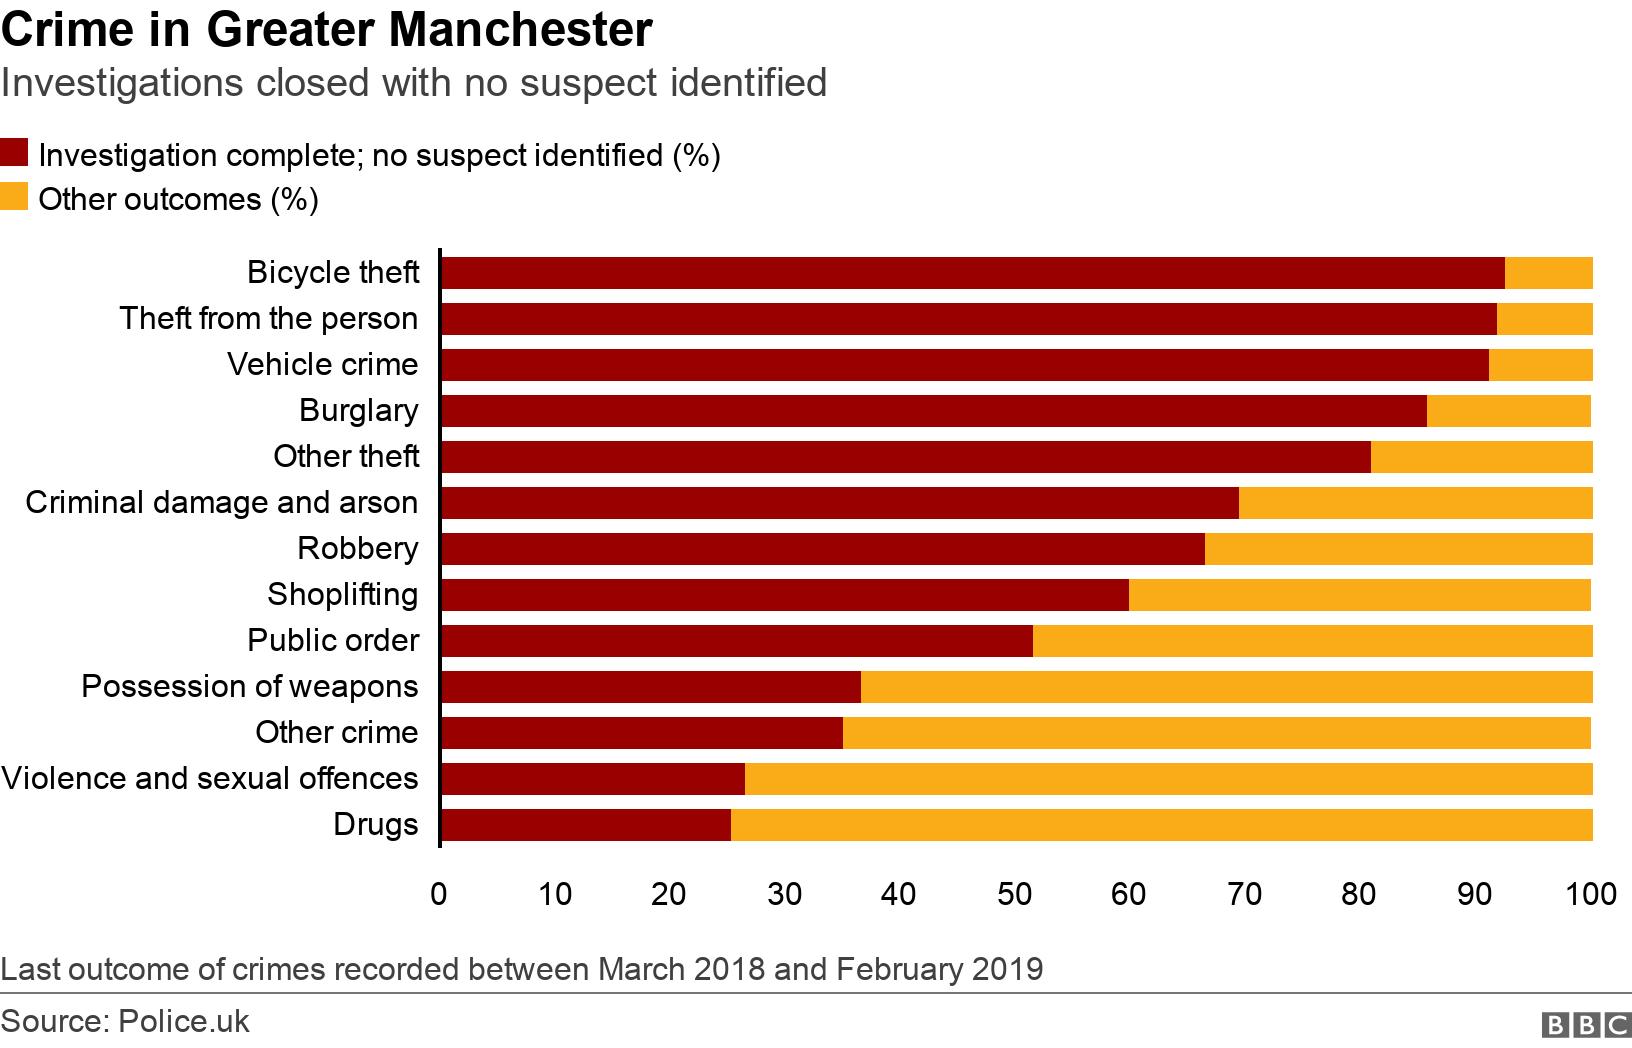 Crime in Greater Manchester. Investigations closed with no suspect identified.  Last outcome of crimes recorded between March 2018 and February 2019.